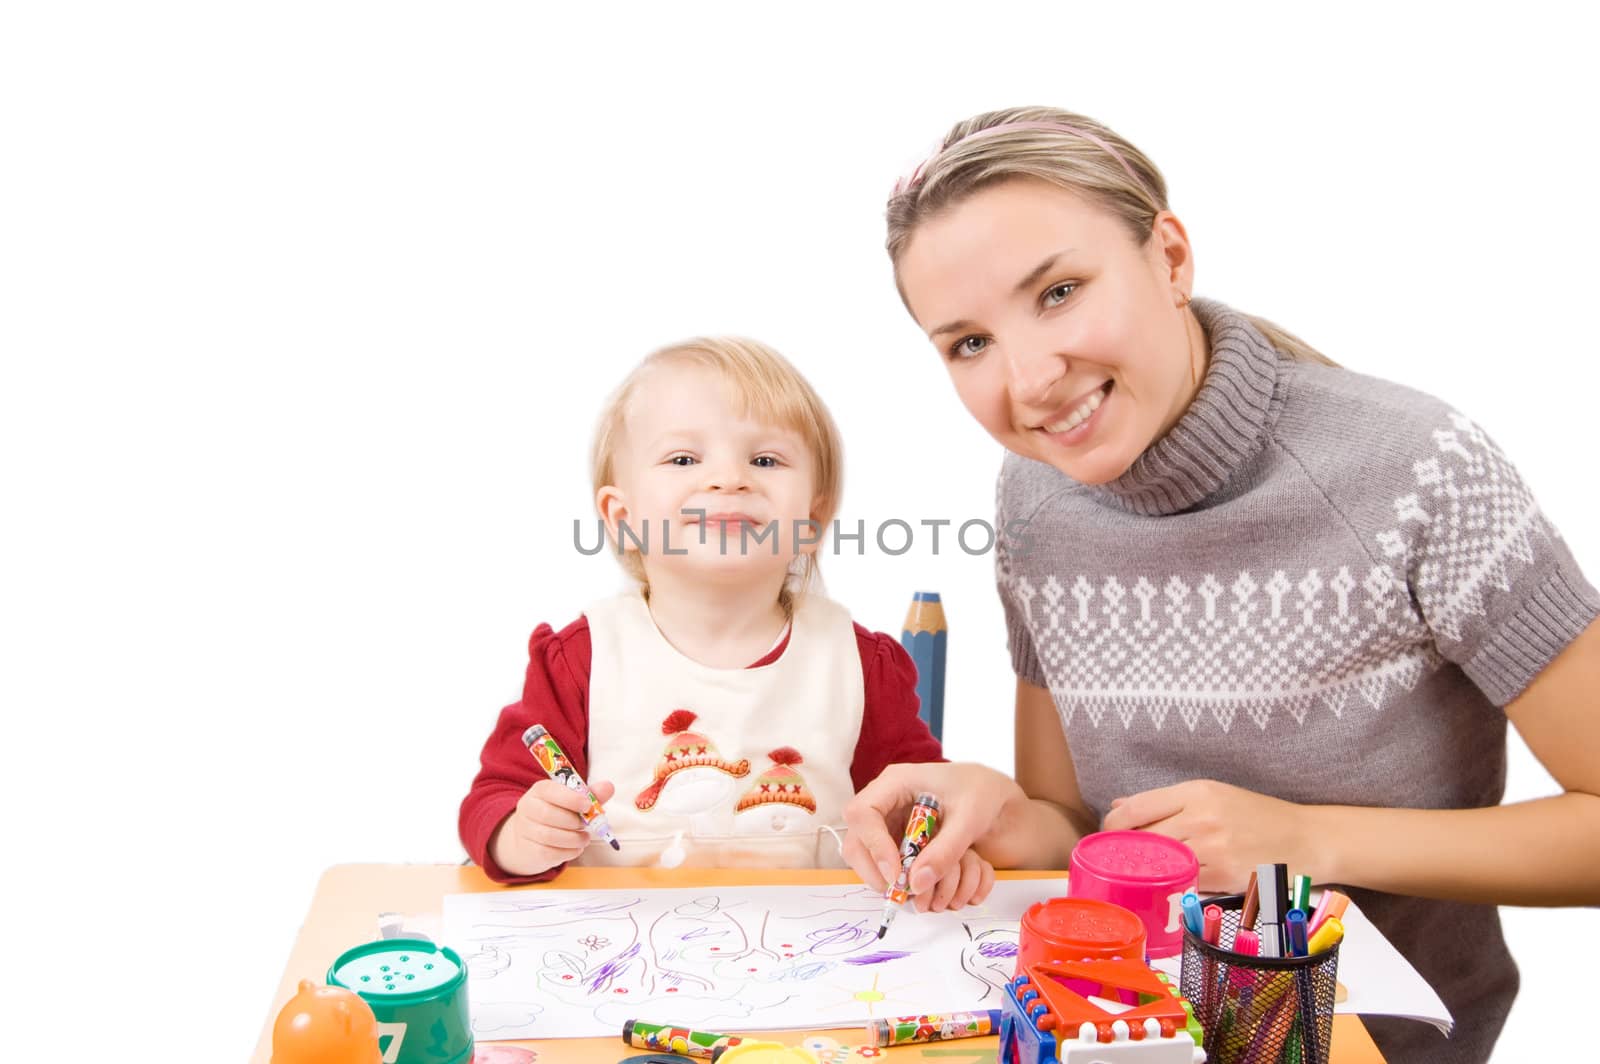 Smiling girl drawing with her mother over white